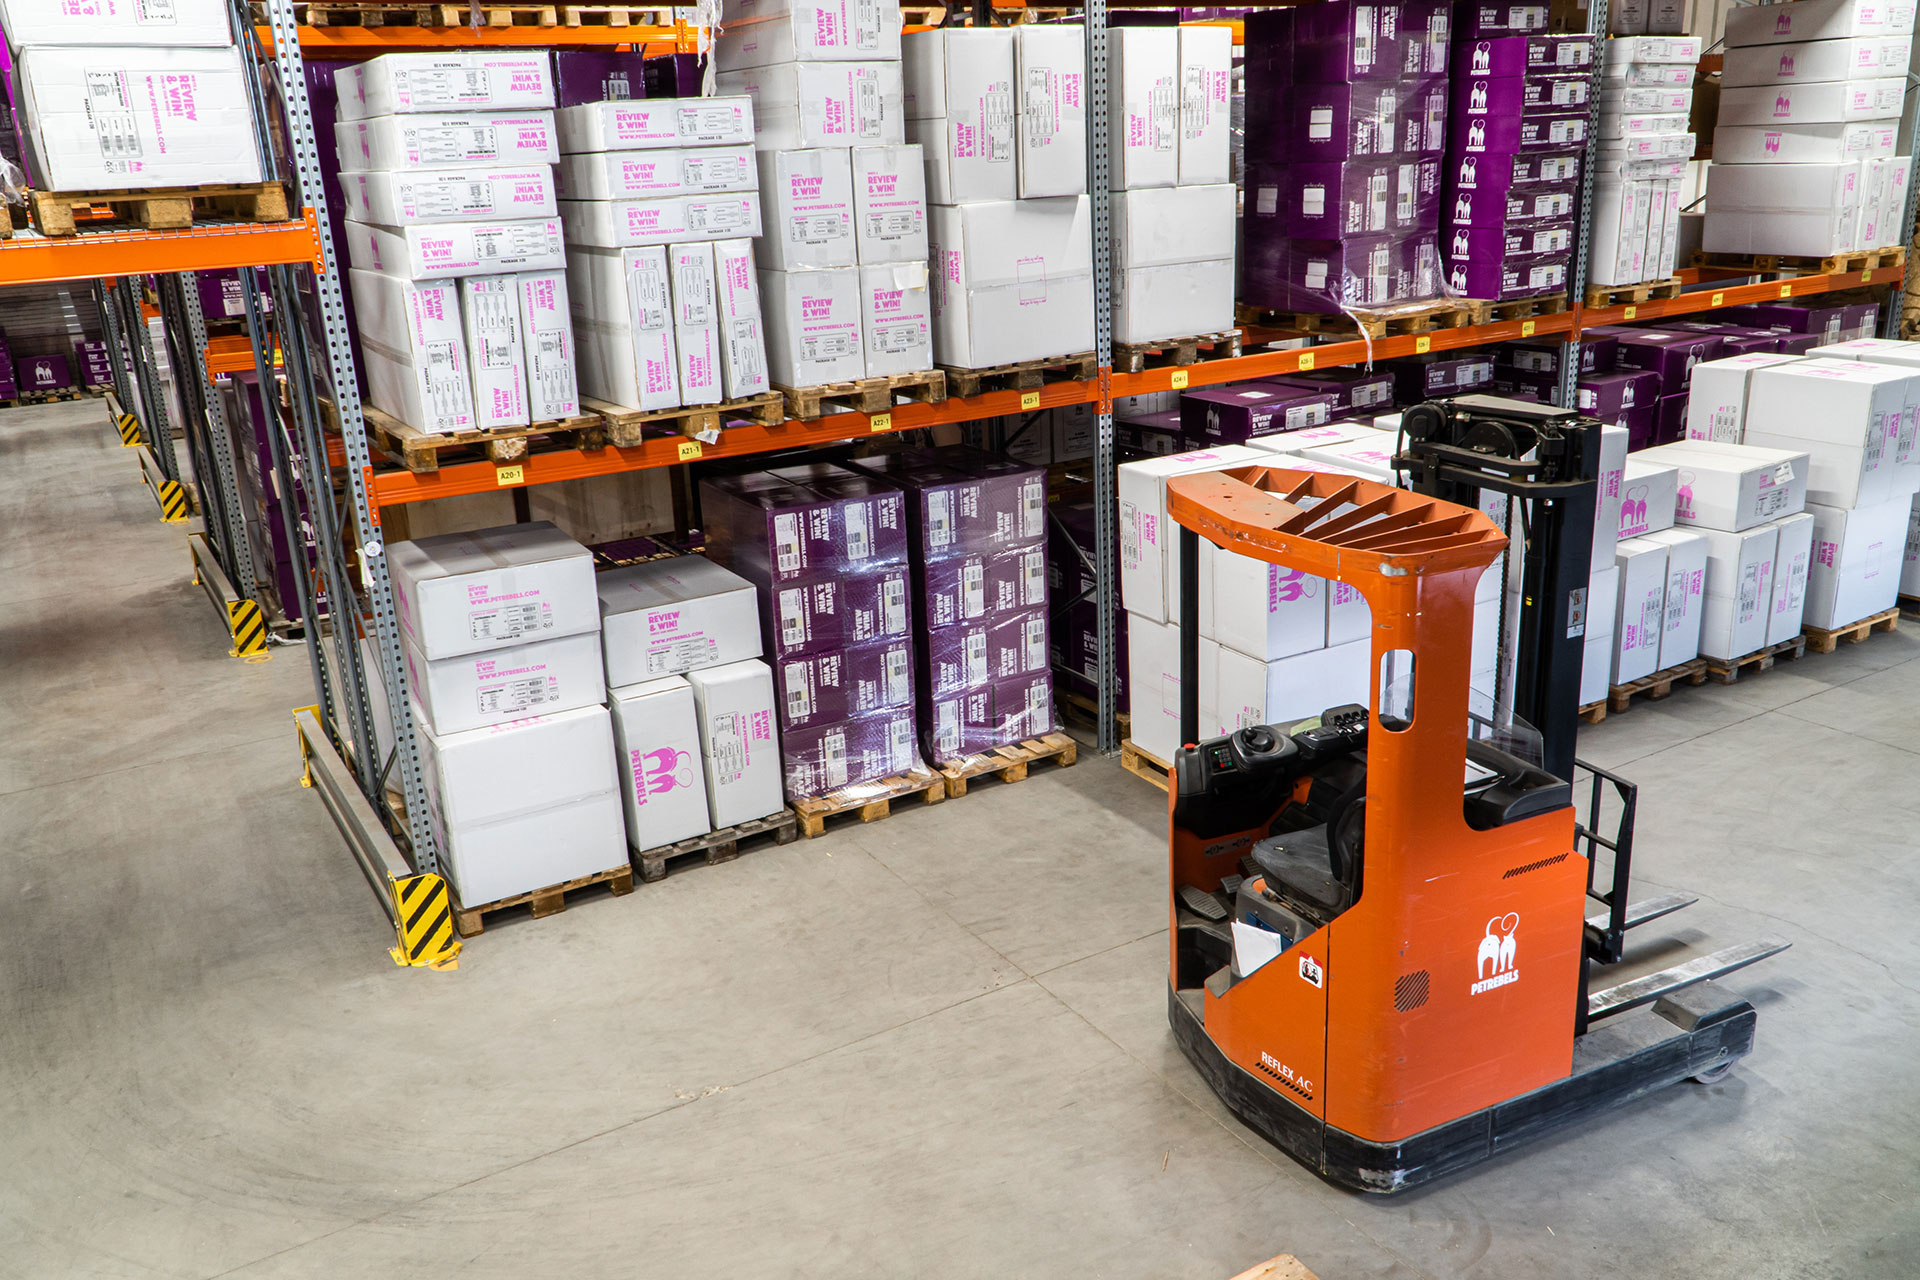 Forklift in a warehouse getting ready to load delivery trucks.